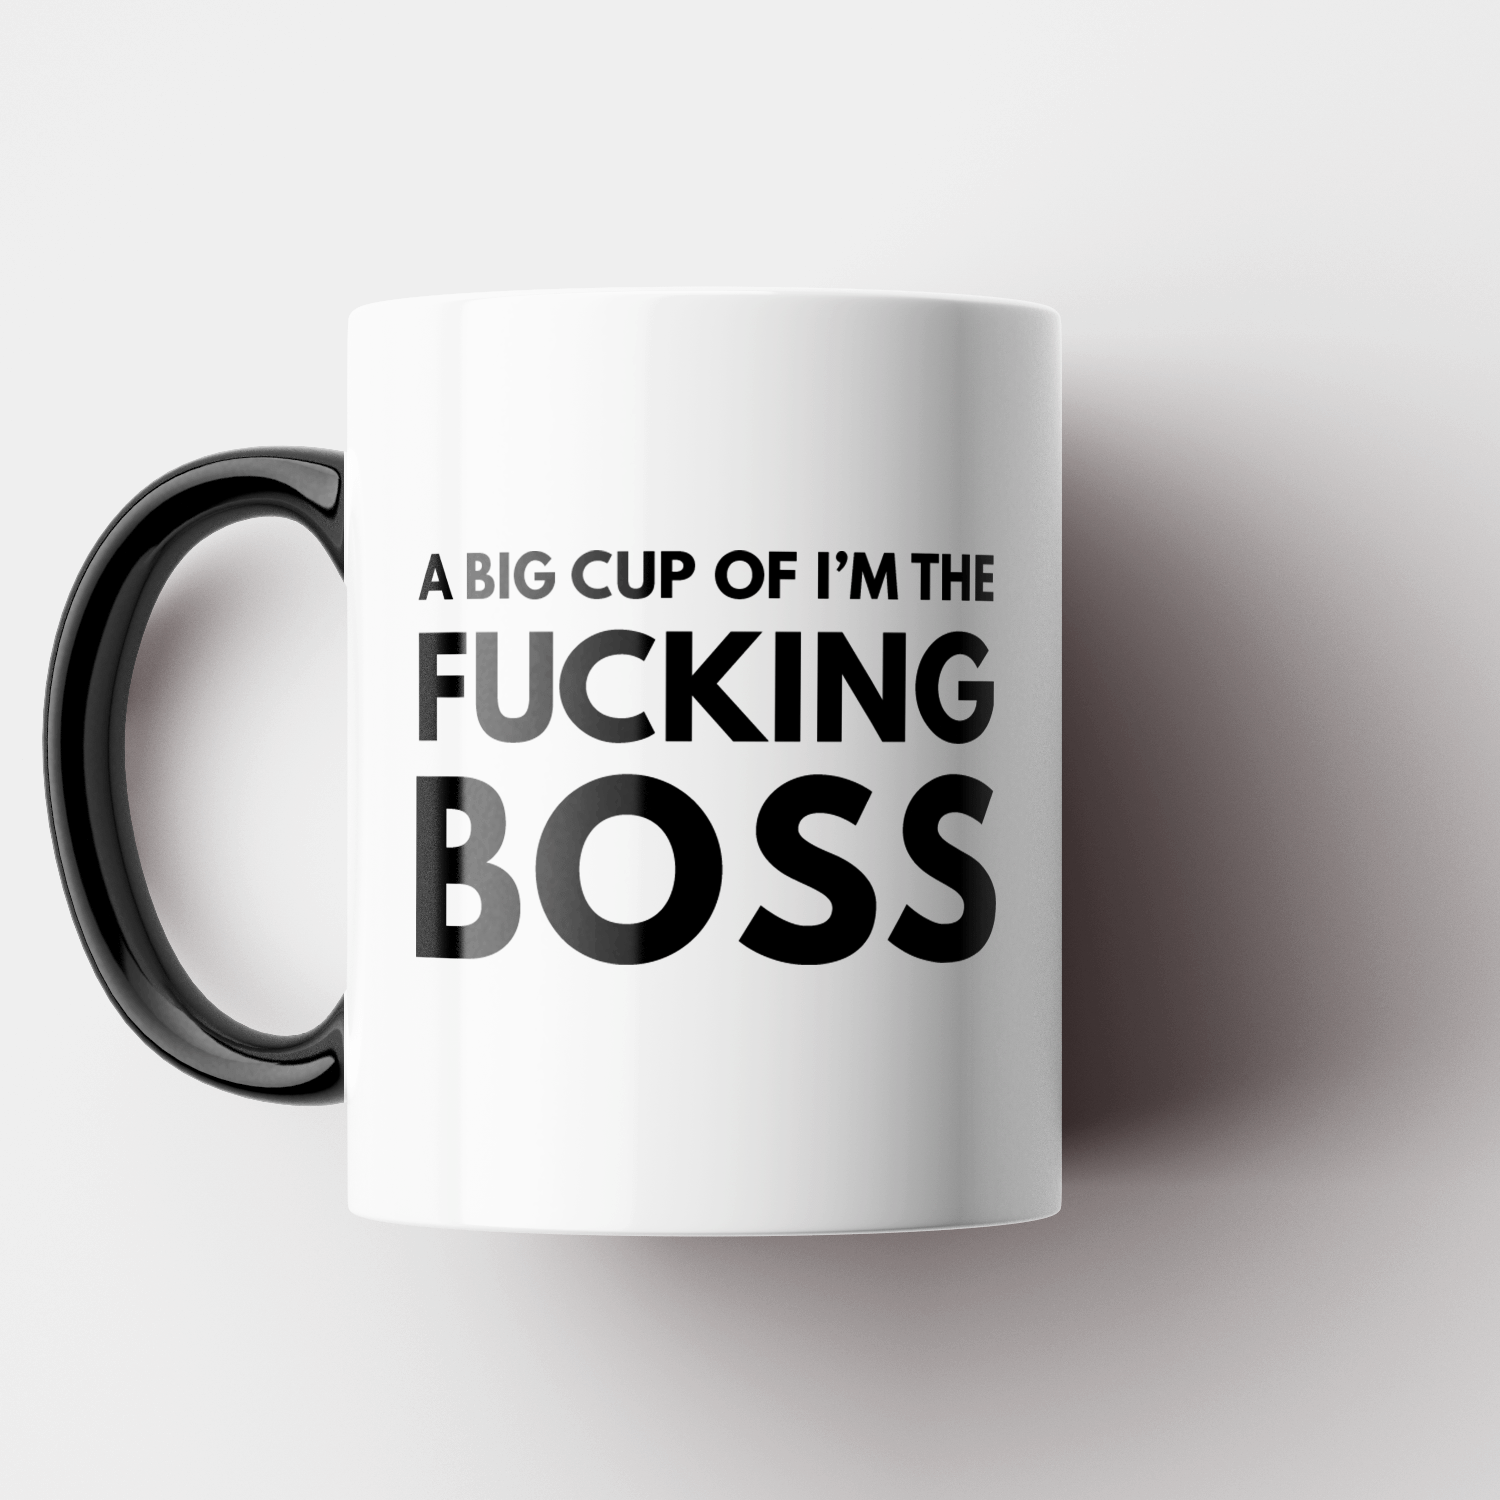 https://theinappropriategiftco.com/cdn/shop/products/tigc-the-inappropriate-gift-co-a-big-cup-of-i-m-the-fucking-boss-mug-29654886187050_1600x.png?v=1658737414